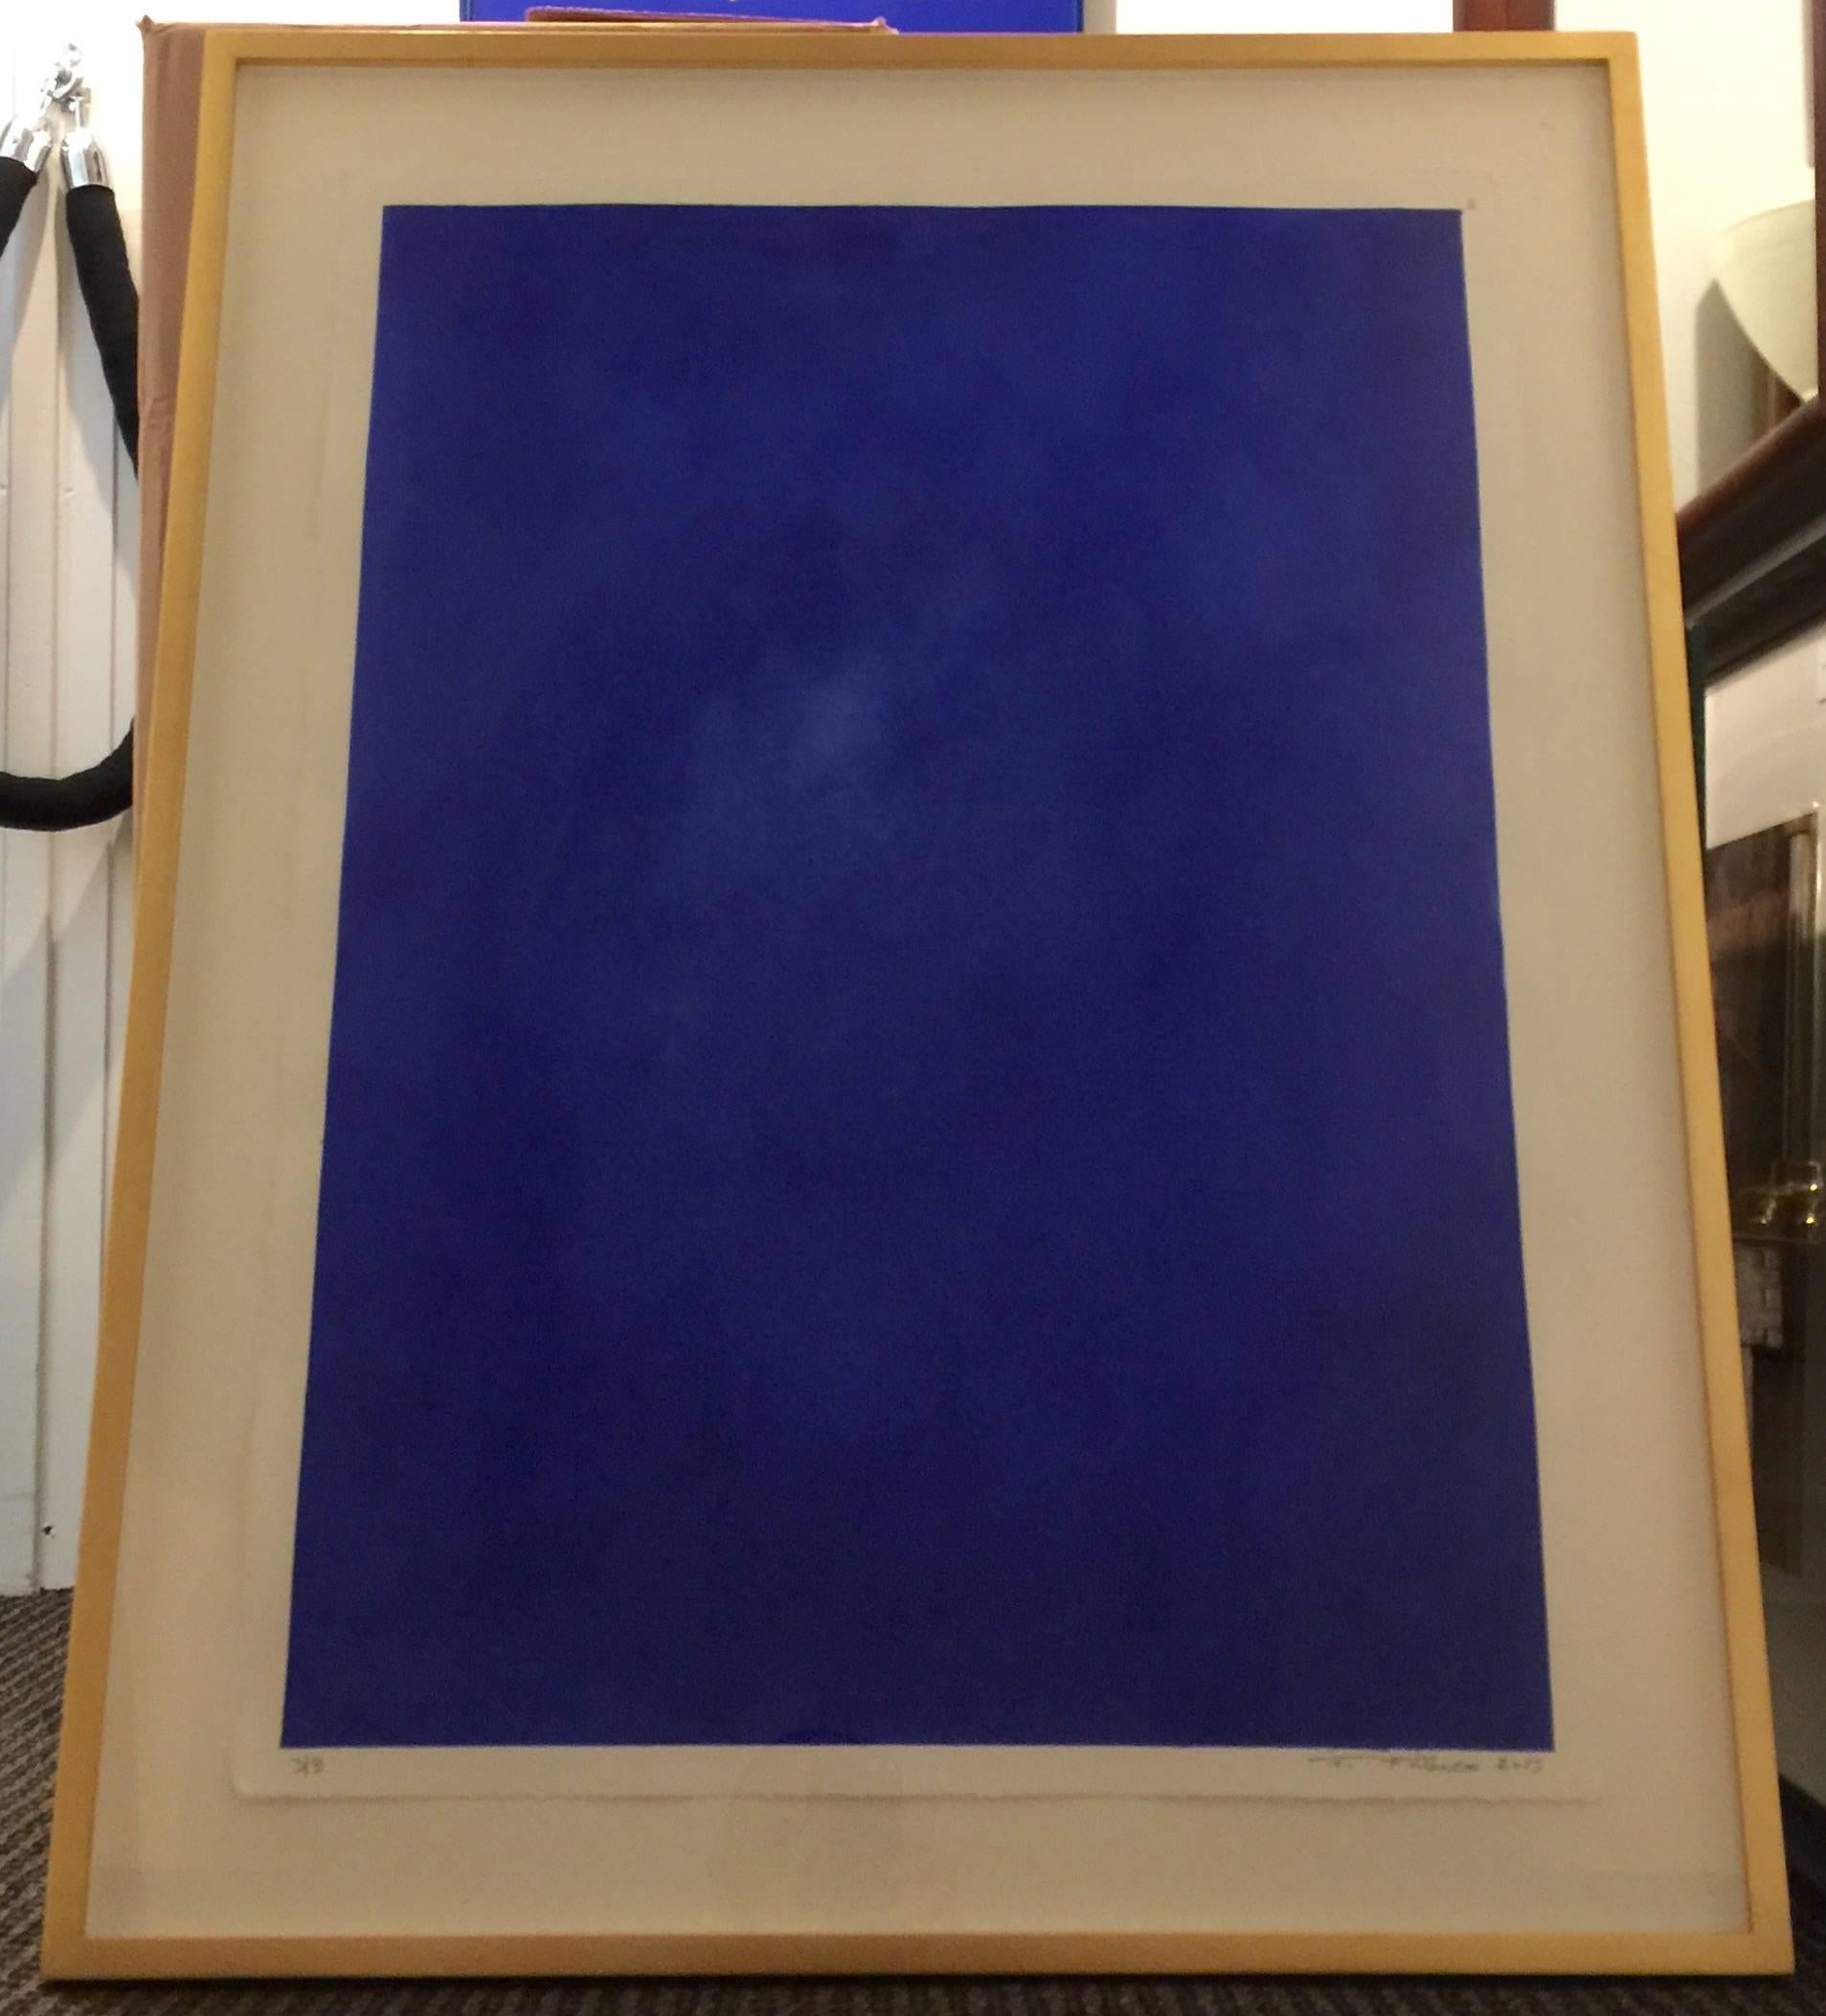 This wonderful acrylic on parchment paper in saturated Yves Klein Bleu by Spanish artist, Francisco Franco. A series of 3, identically framed and numbered 1 through 3 of 3. Each is a VERY subtle variation on the next, rich deep shadowing evokes the